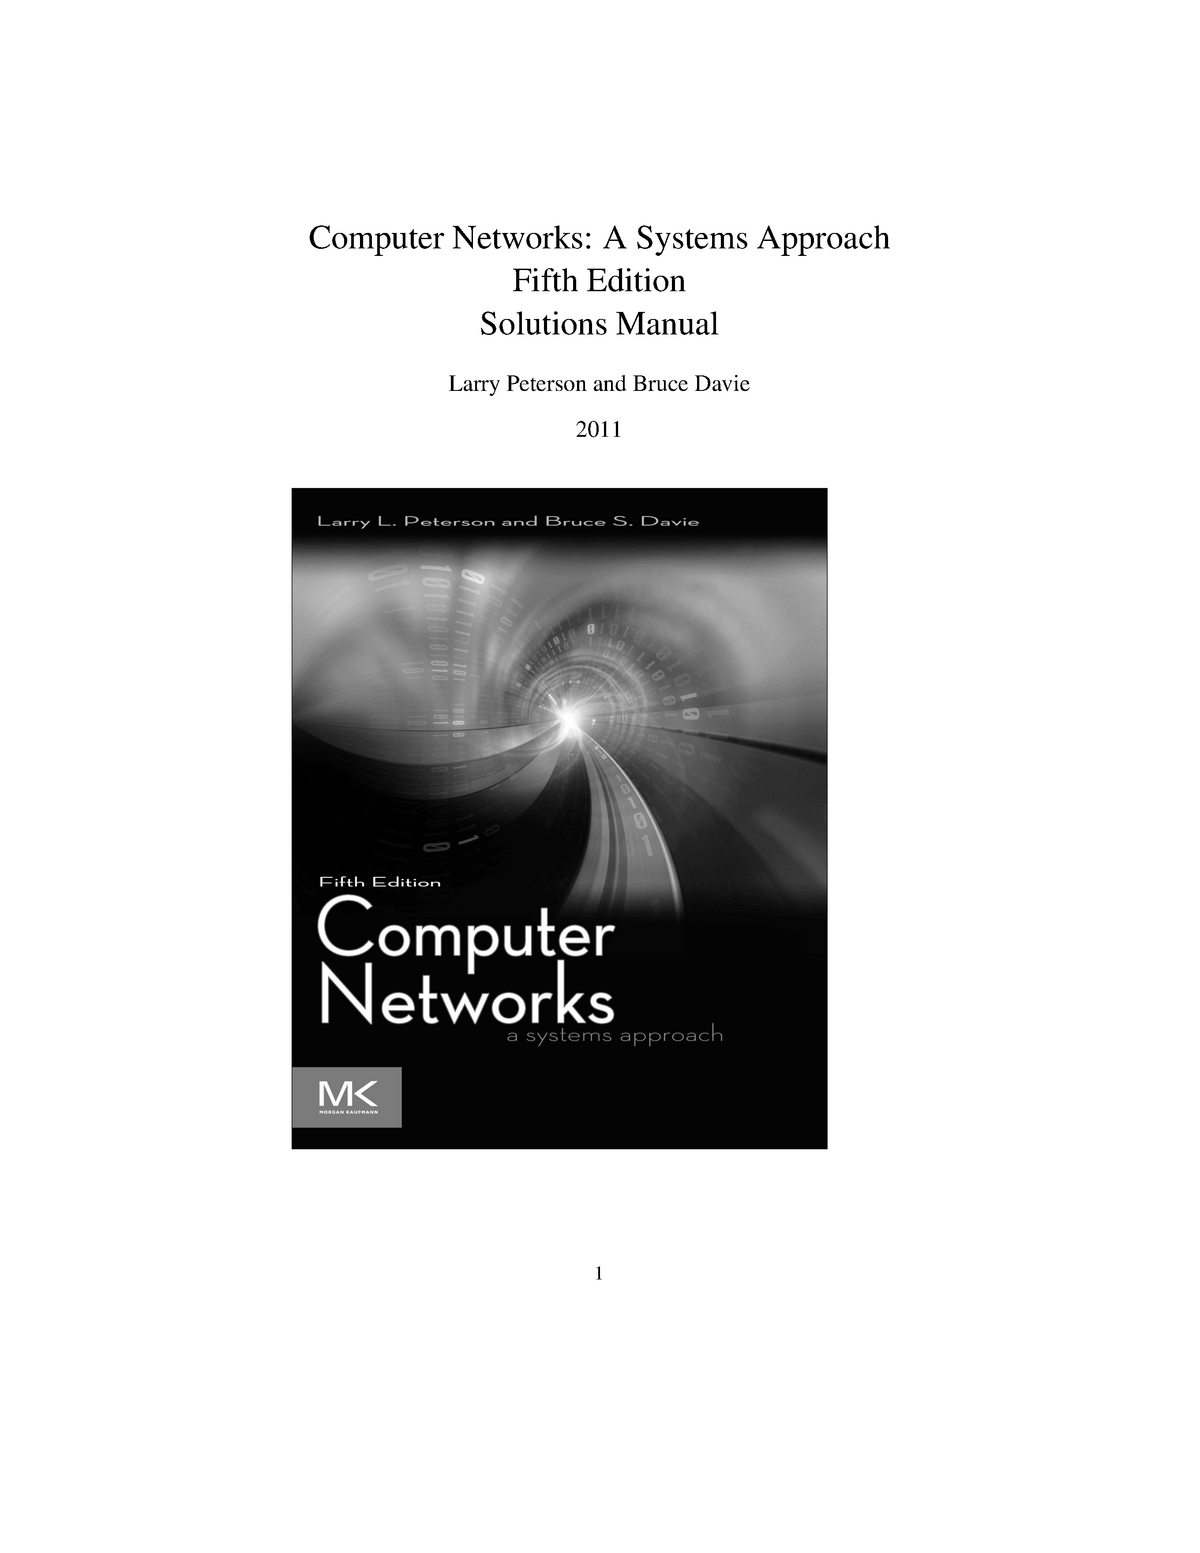 PD5e Solutions Manual Solution of Computer Networks, Fifth Edition